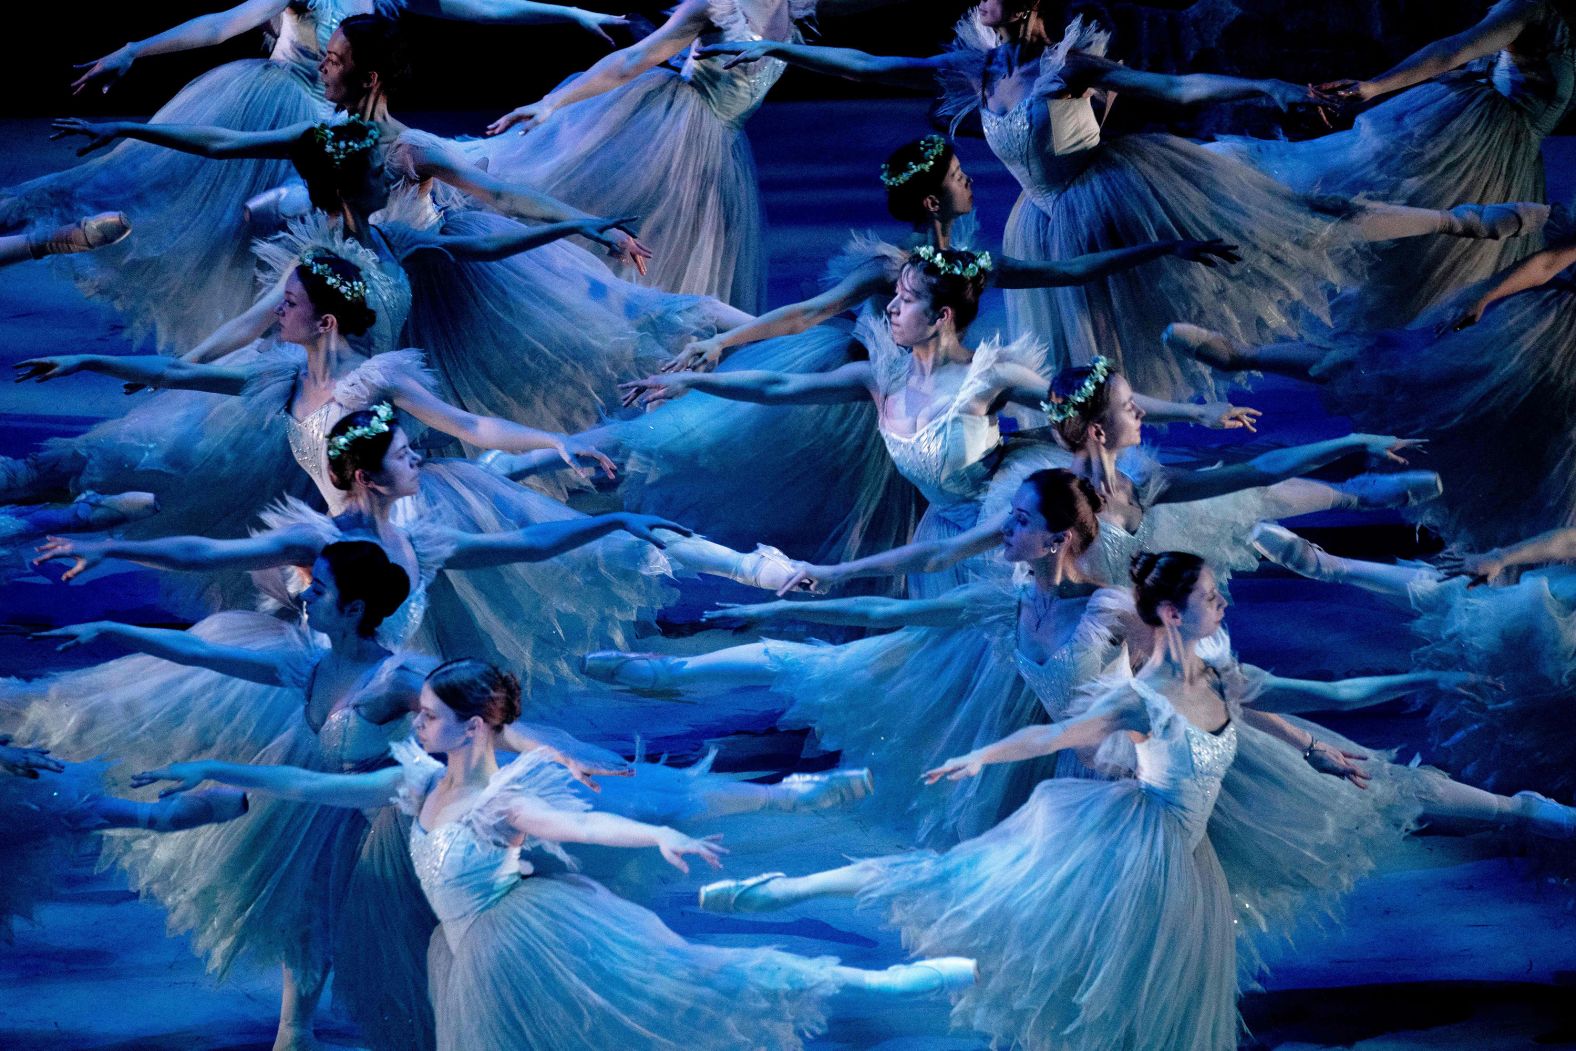 Performers with the United Ukrainian Ballet take part in a dress rehearsal at the Kennedy Center in Washington, DC, on Wednesday, February 1.